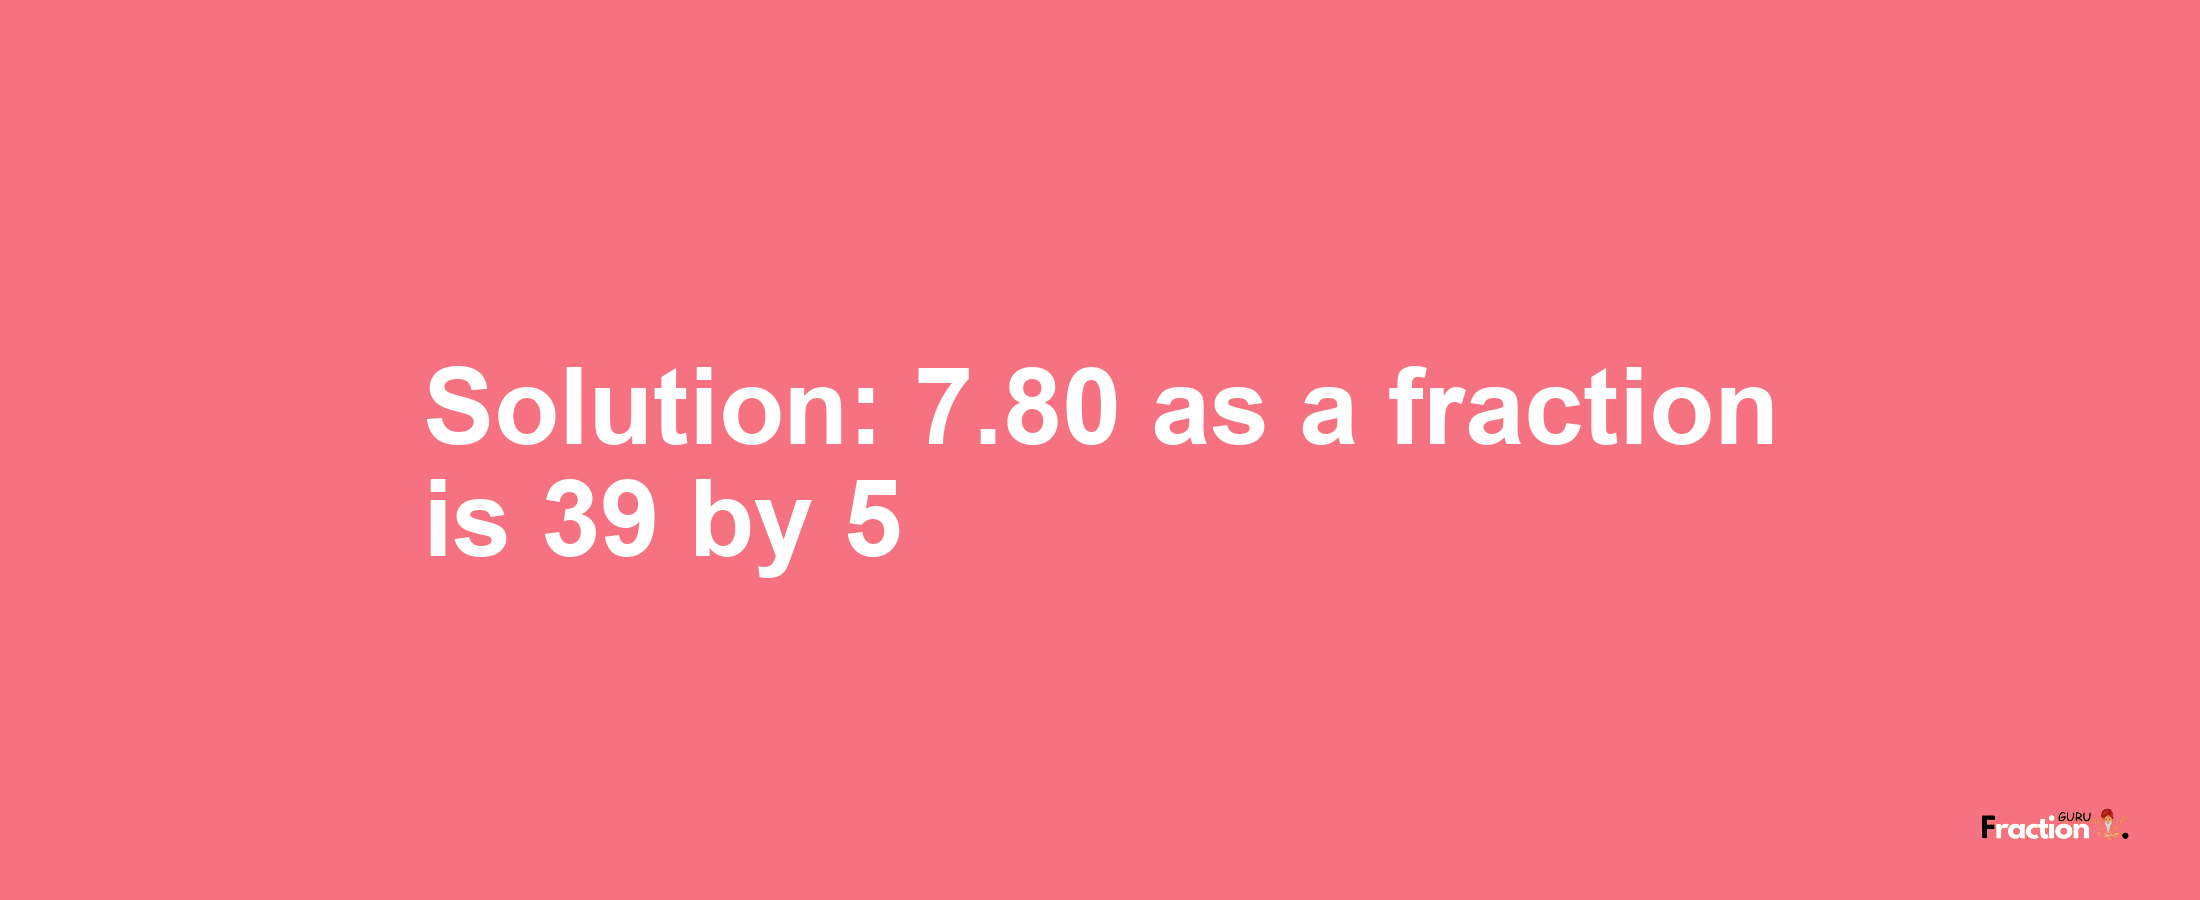 Solution:7.80 as a fraction is 39/5